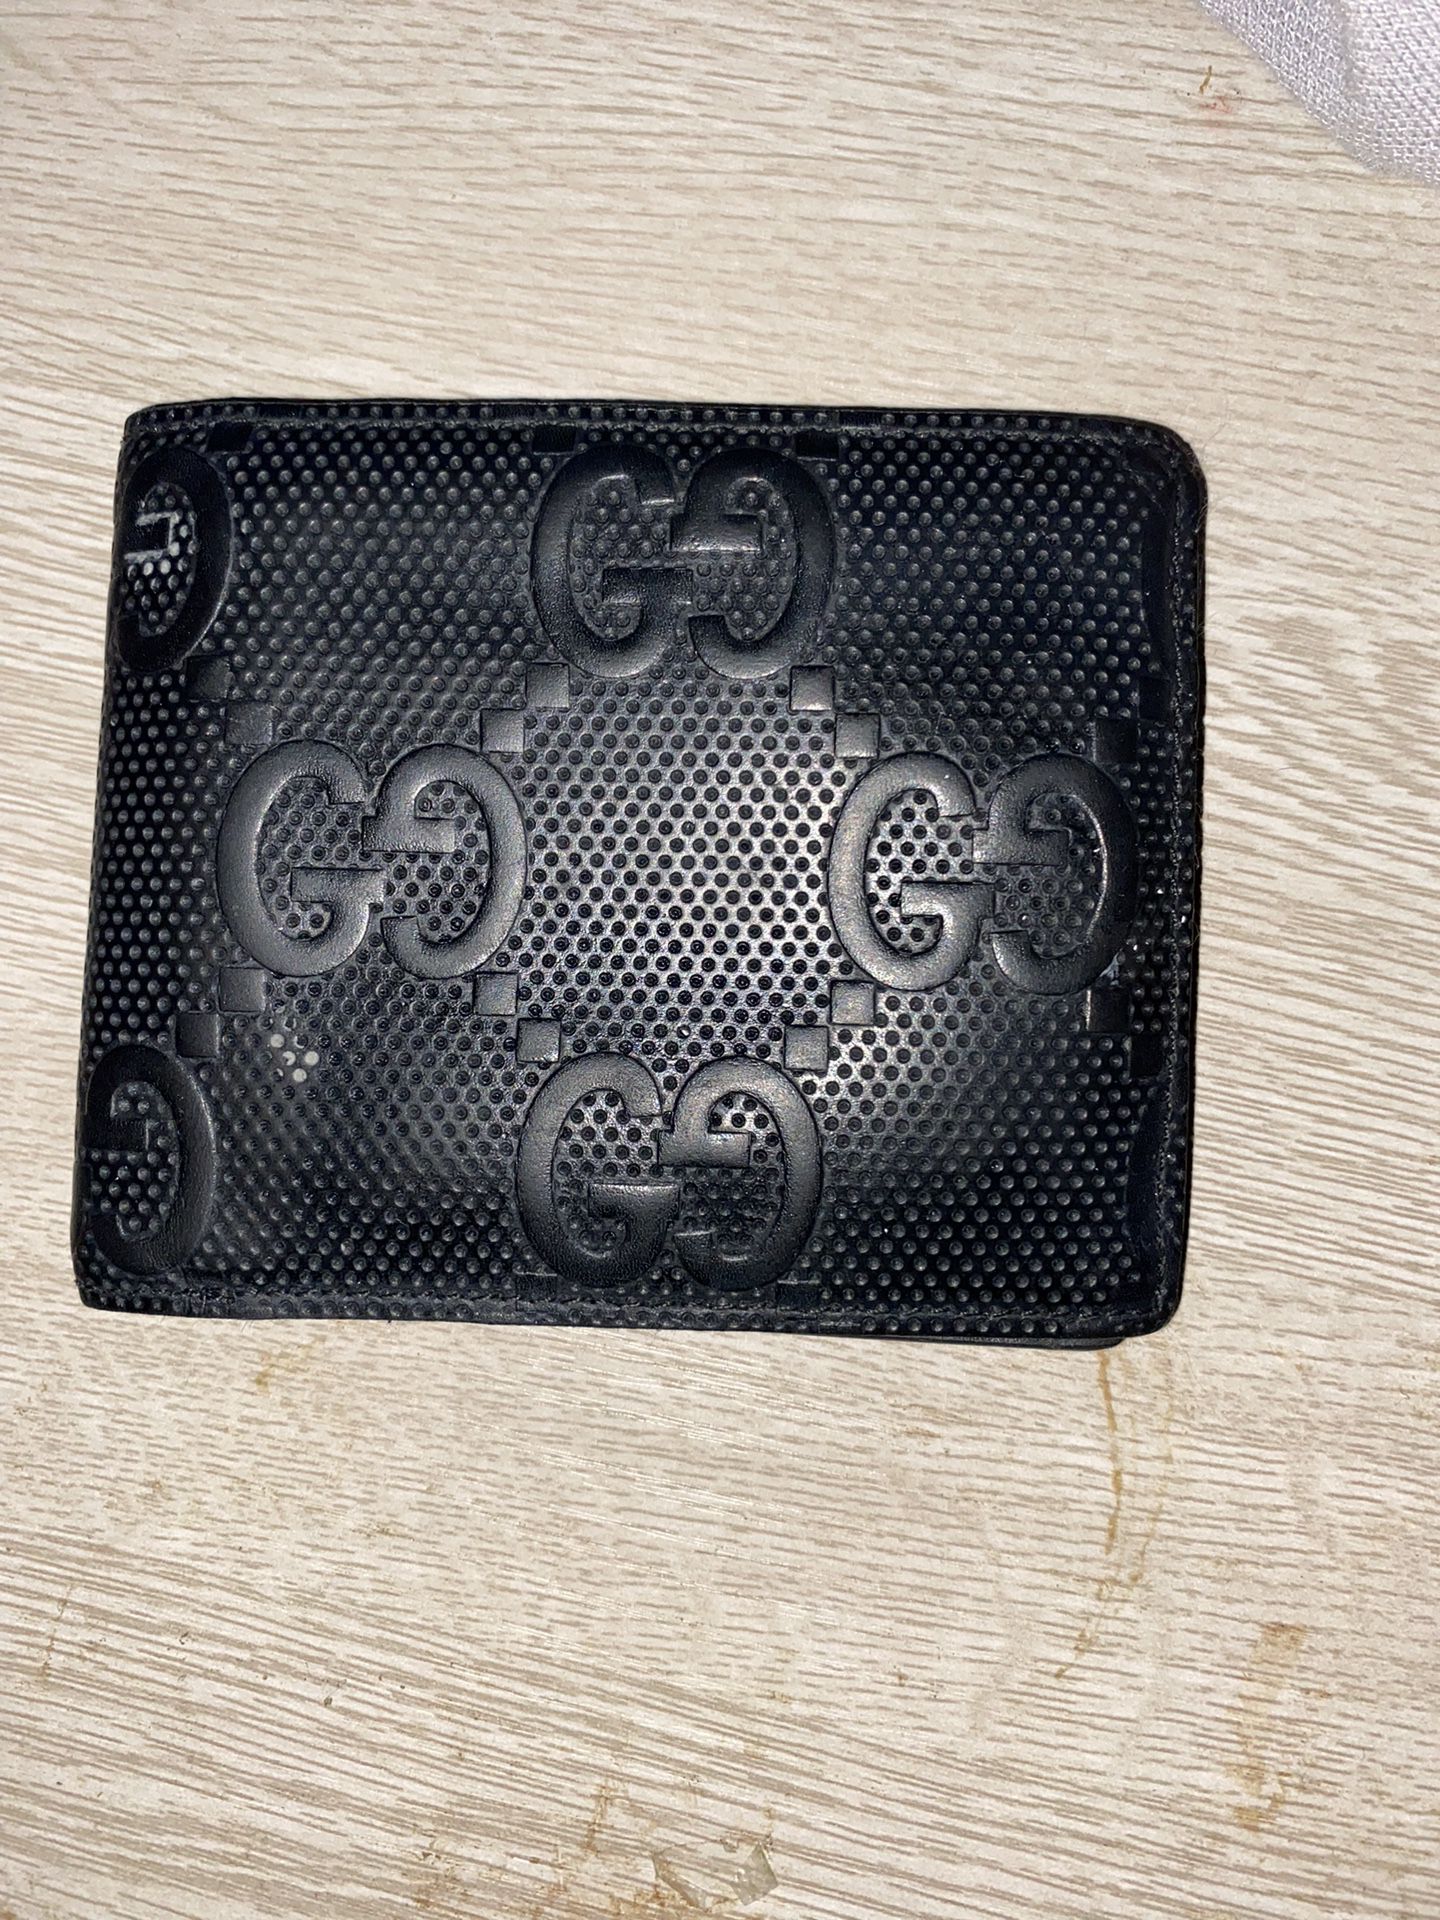 GUCCI WALLET AUTHENTIC